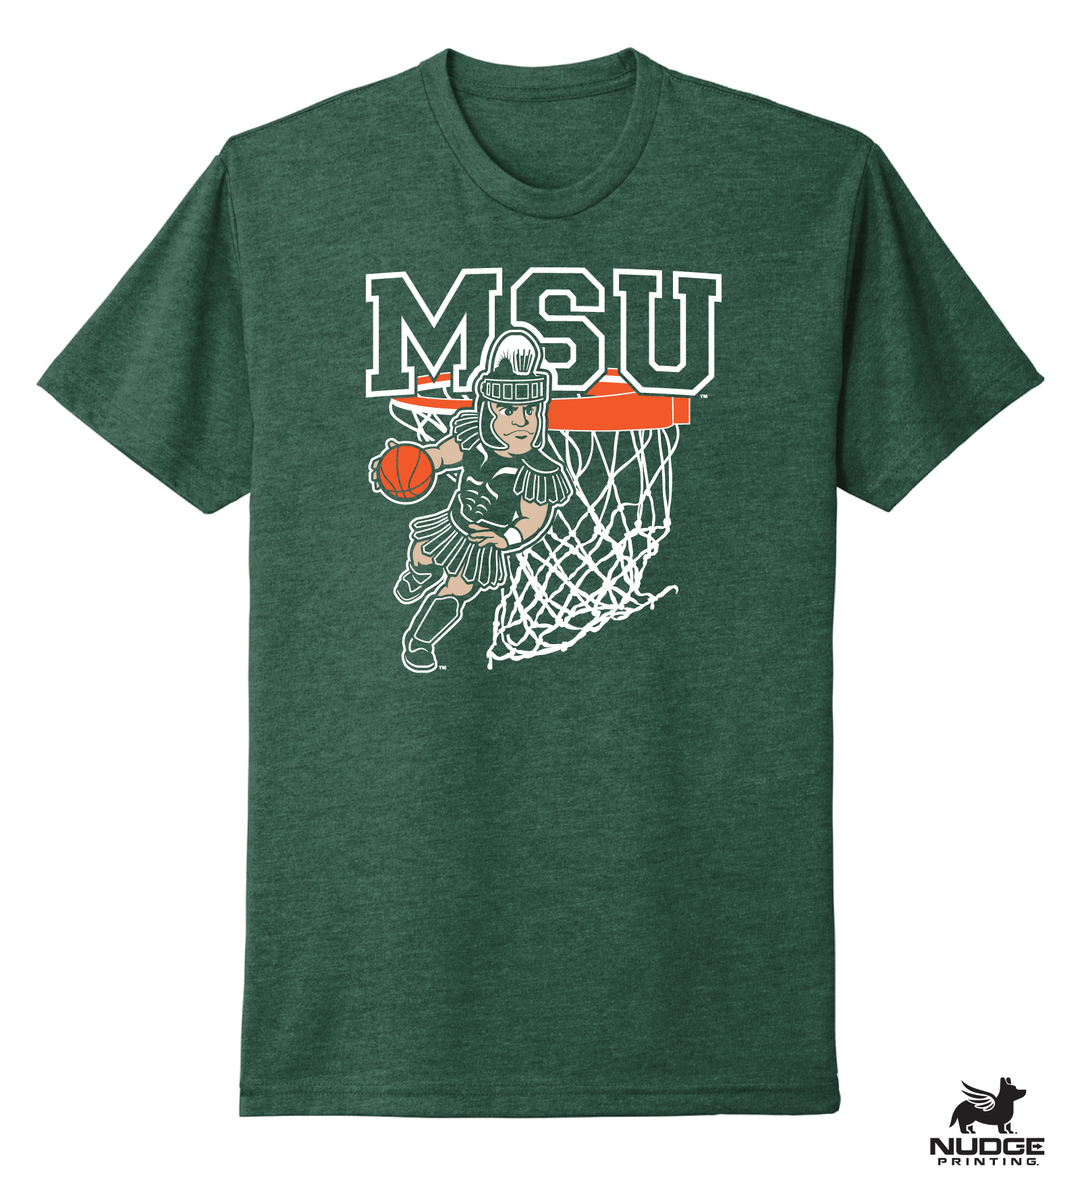 Green Michigan State T Shirt with Sparty Playing Basketball